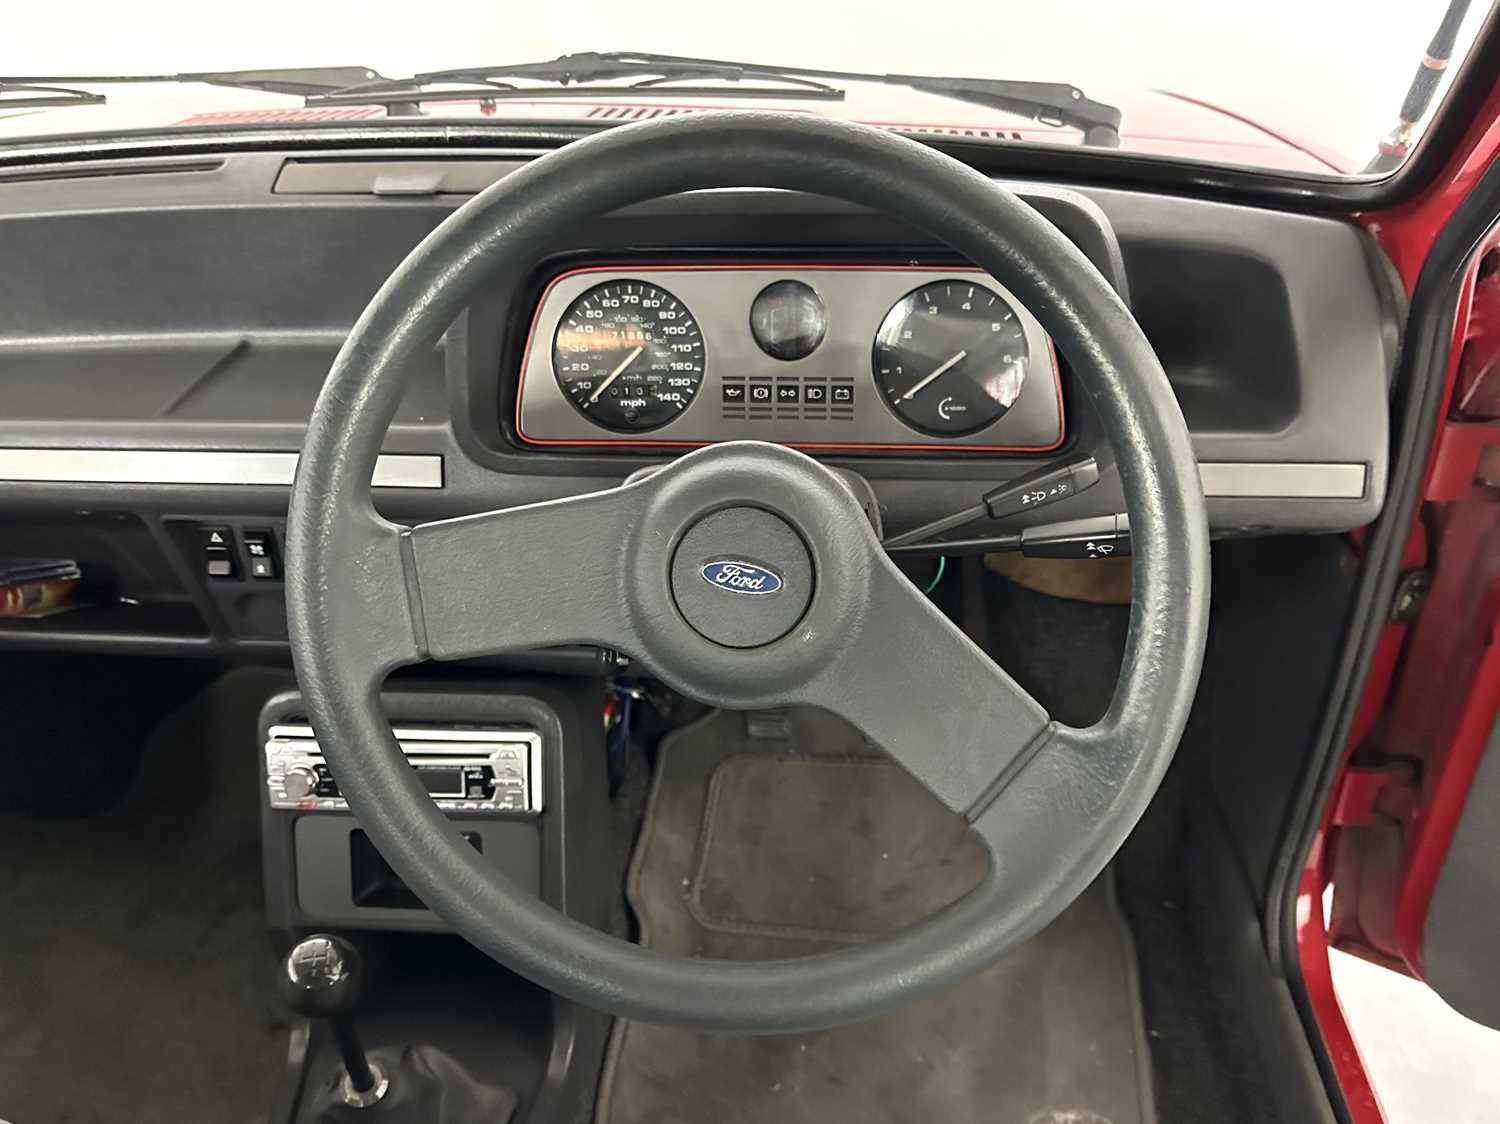 1983 Ford Fiesta - Image 25 of 31